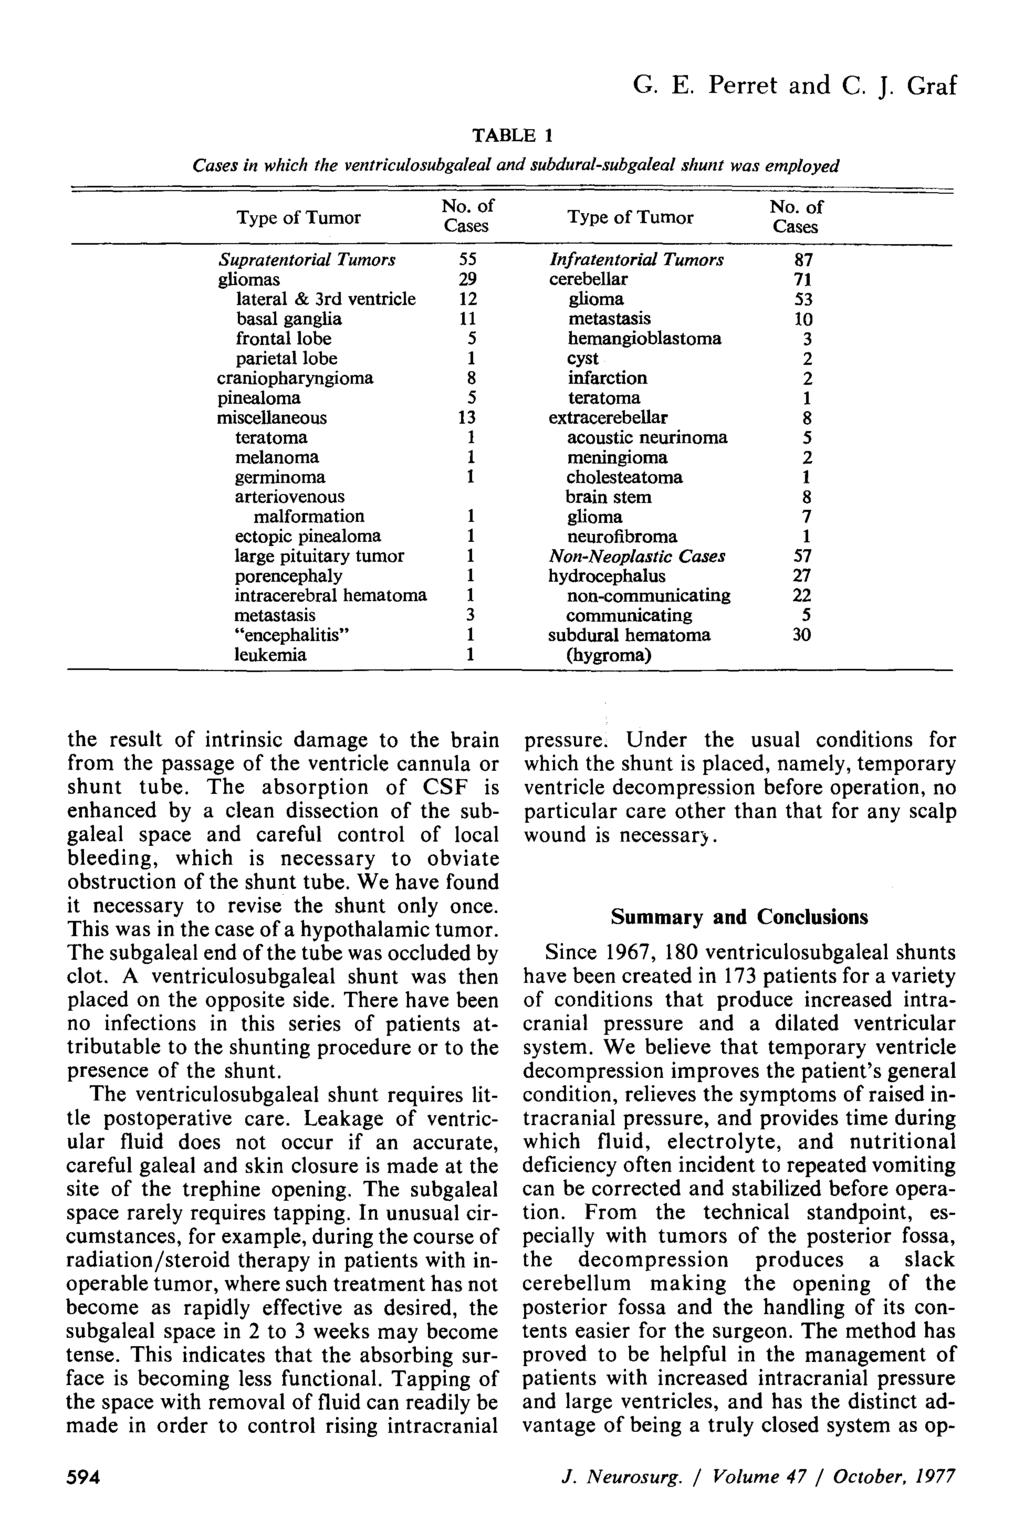 TABLE 1 G. E. Perret and C. J. Graf Cases in which the ventriculosubgaleal and subdural-subgaleal shunt was employed No. of No.